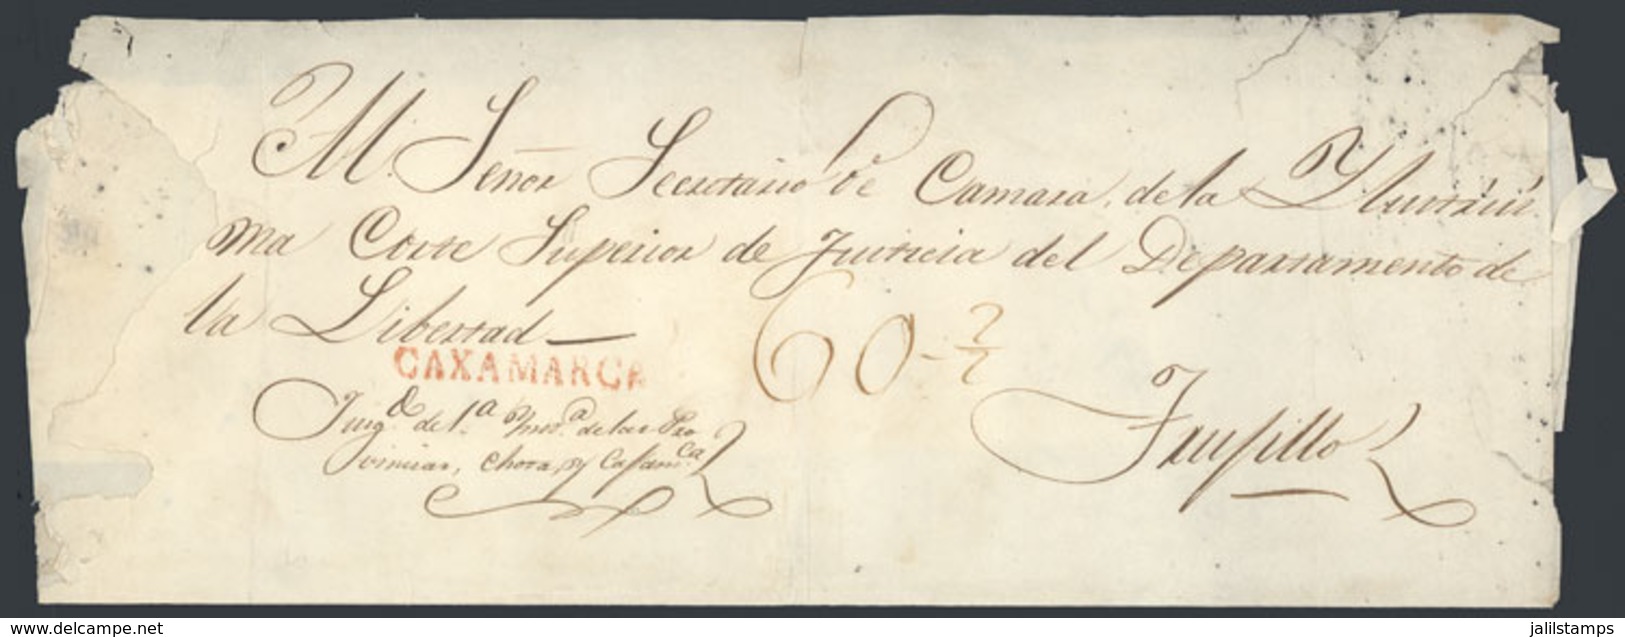 814 PERU: Official Folded Cover Sent To Trujillo In 1843, With Straightline Red CAXAMARCA Mark Very Well Applied, Minor  - Peru